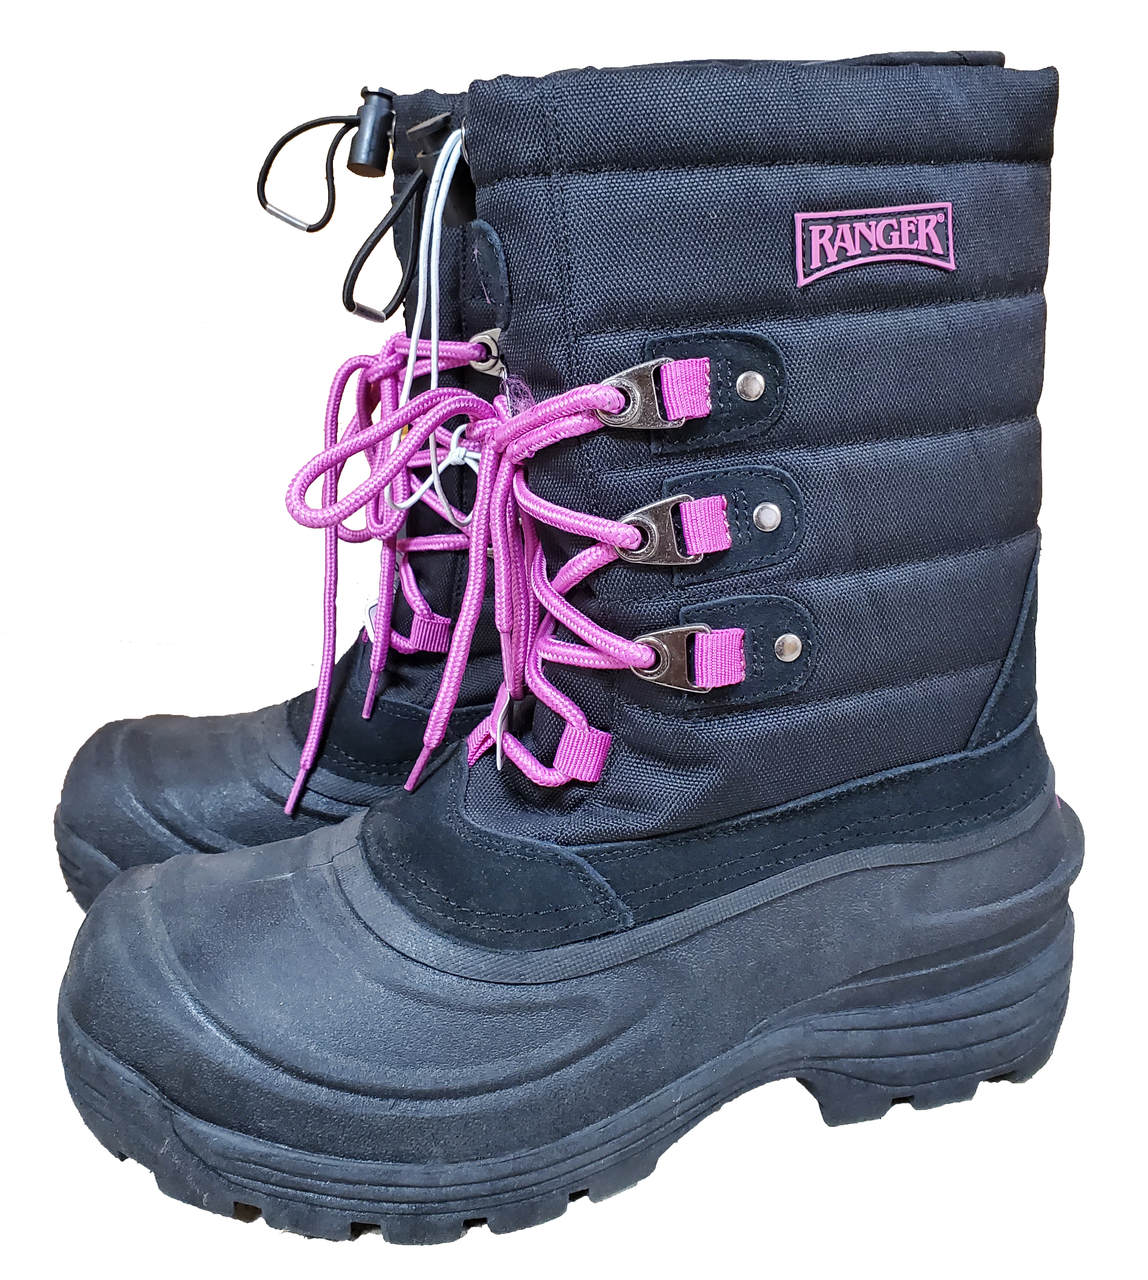 Ranger Tundra Winter Boot, Black and Pink - CountryMax